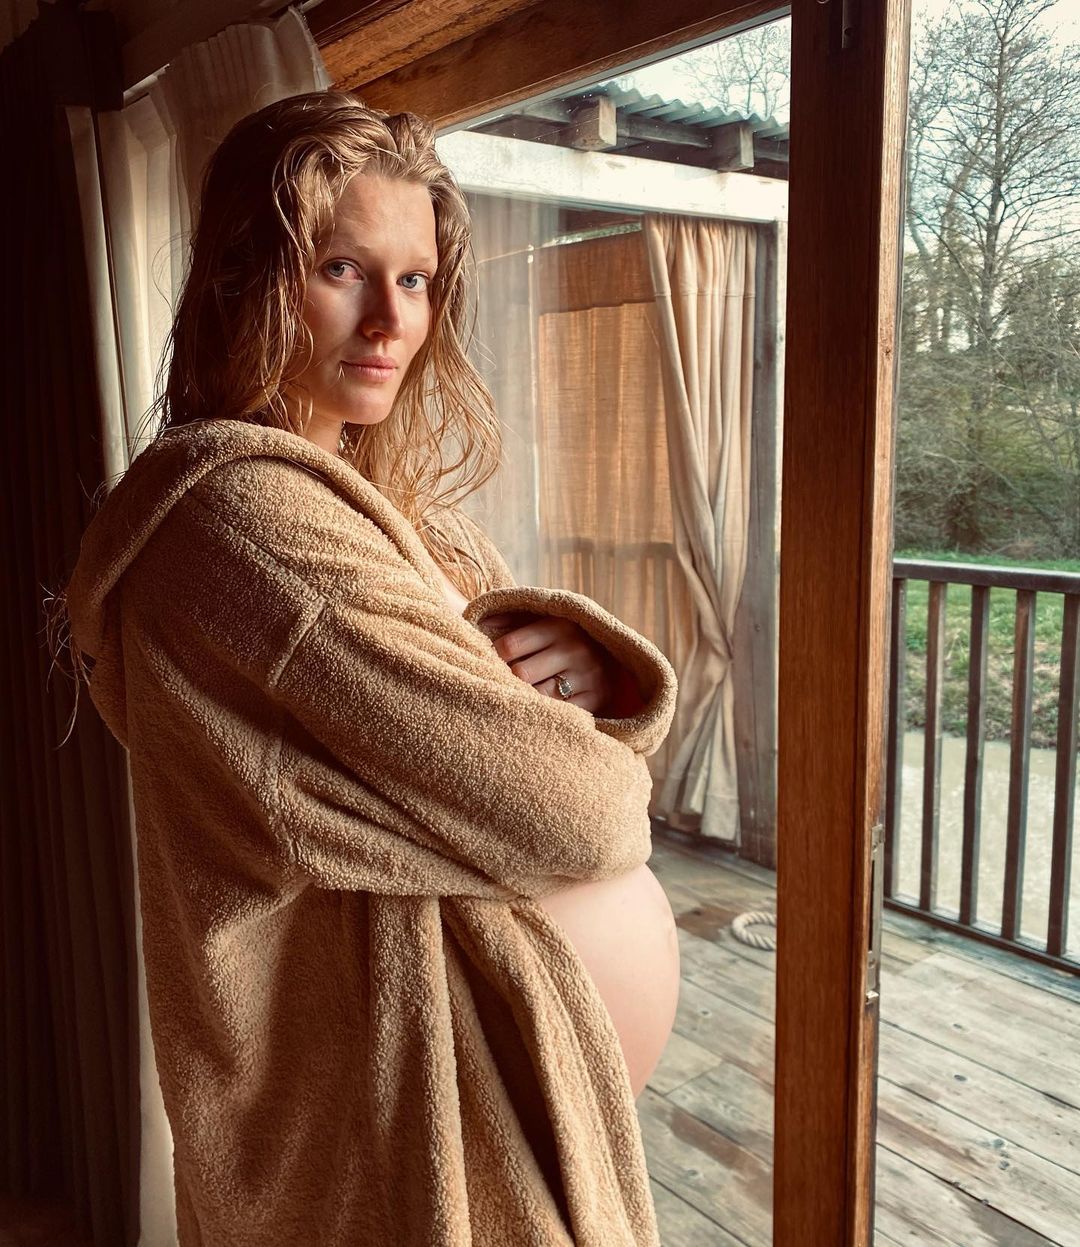 Celebrities Posing Nude While Pregnant Maternity Pics picture photo